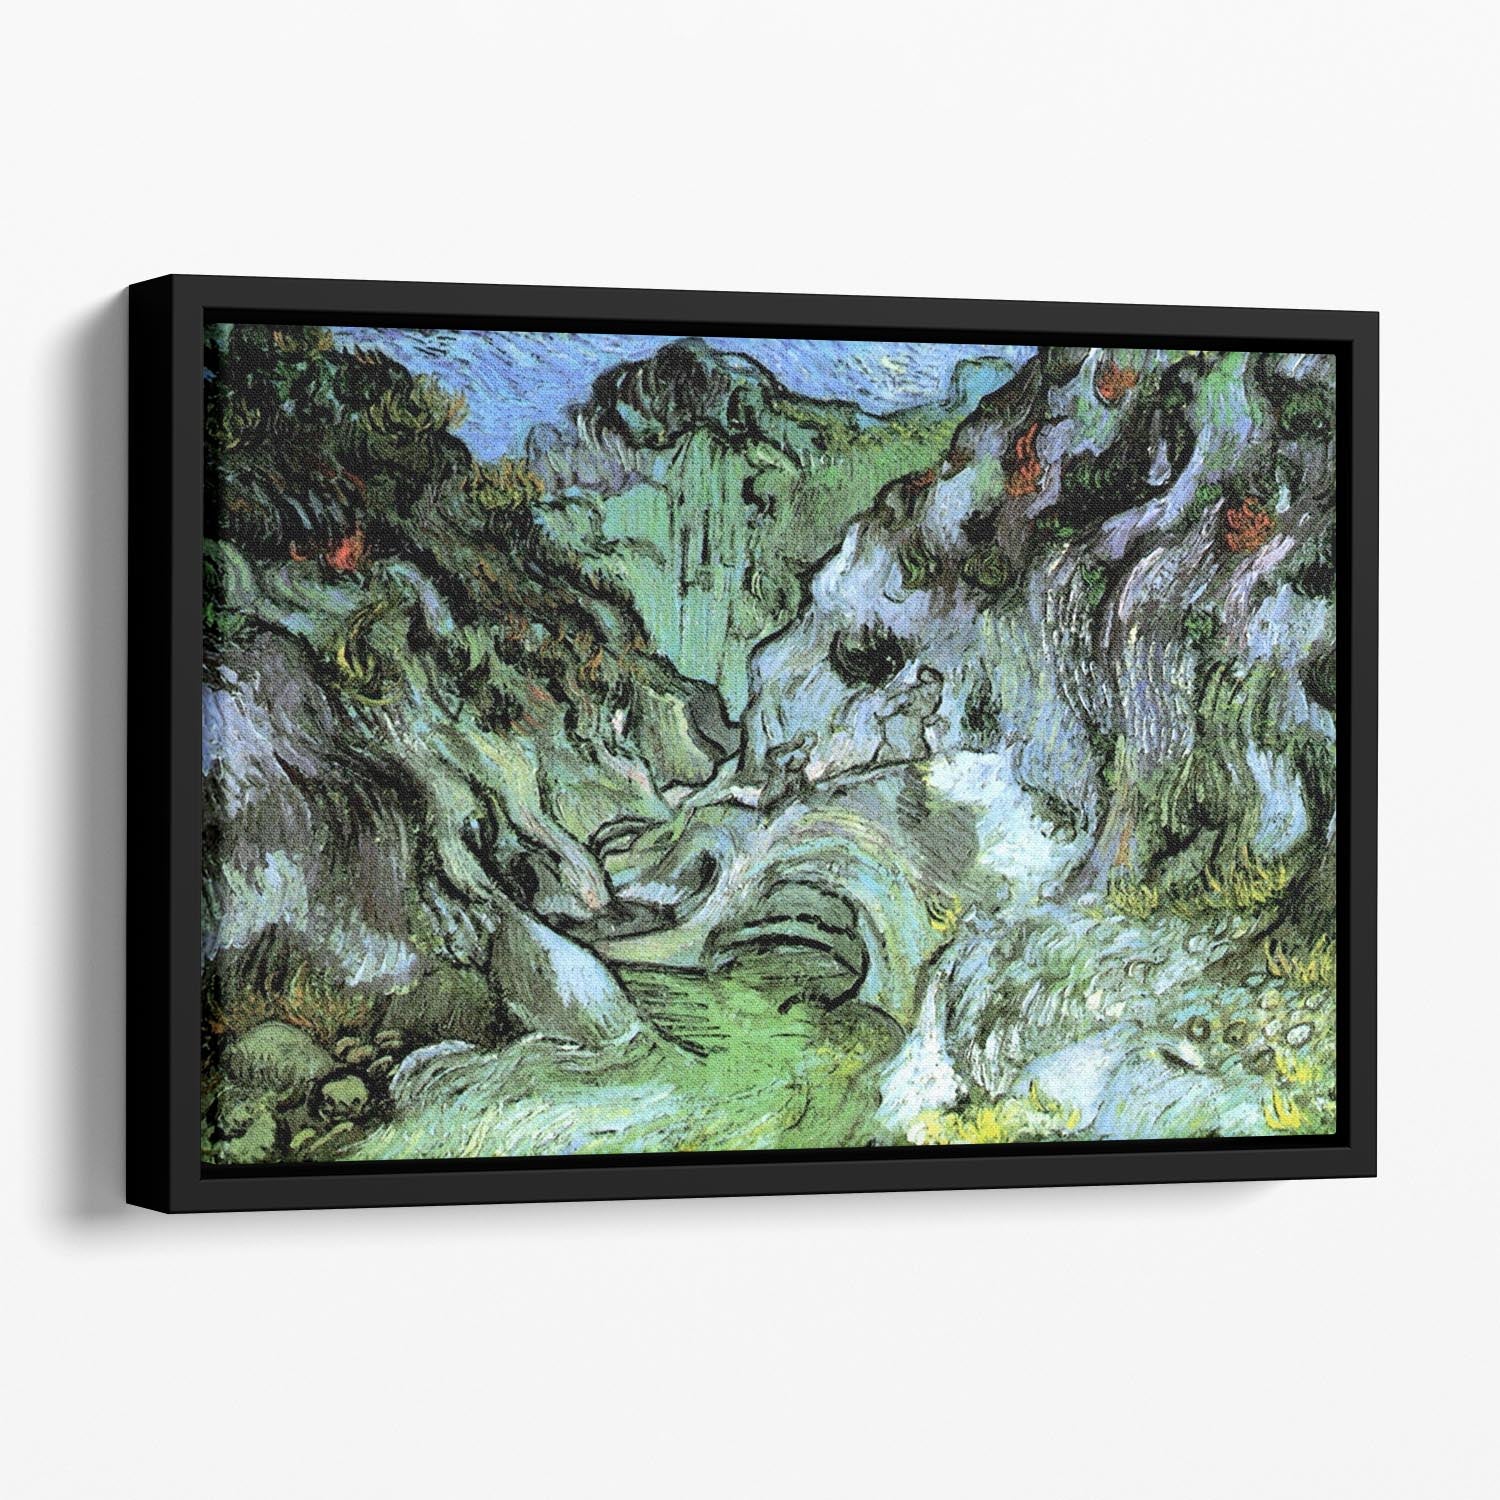 Les Peiroulets Ravine 2 by Van Gogh Floating Framed Canvas